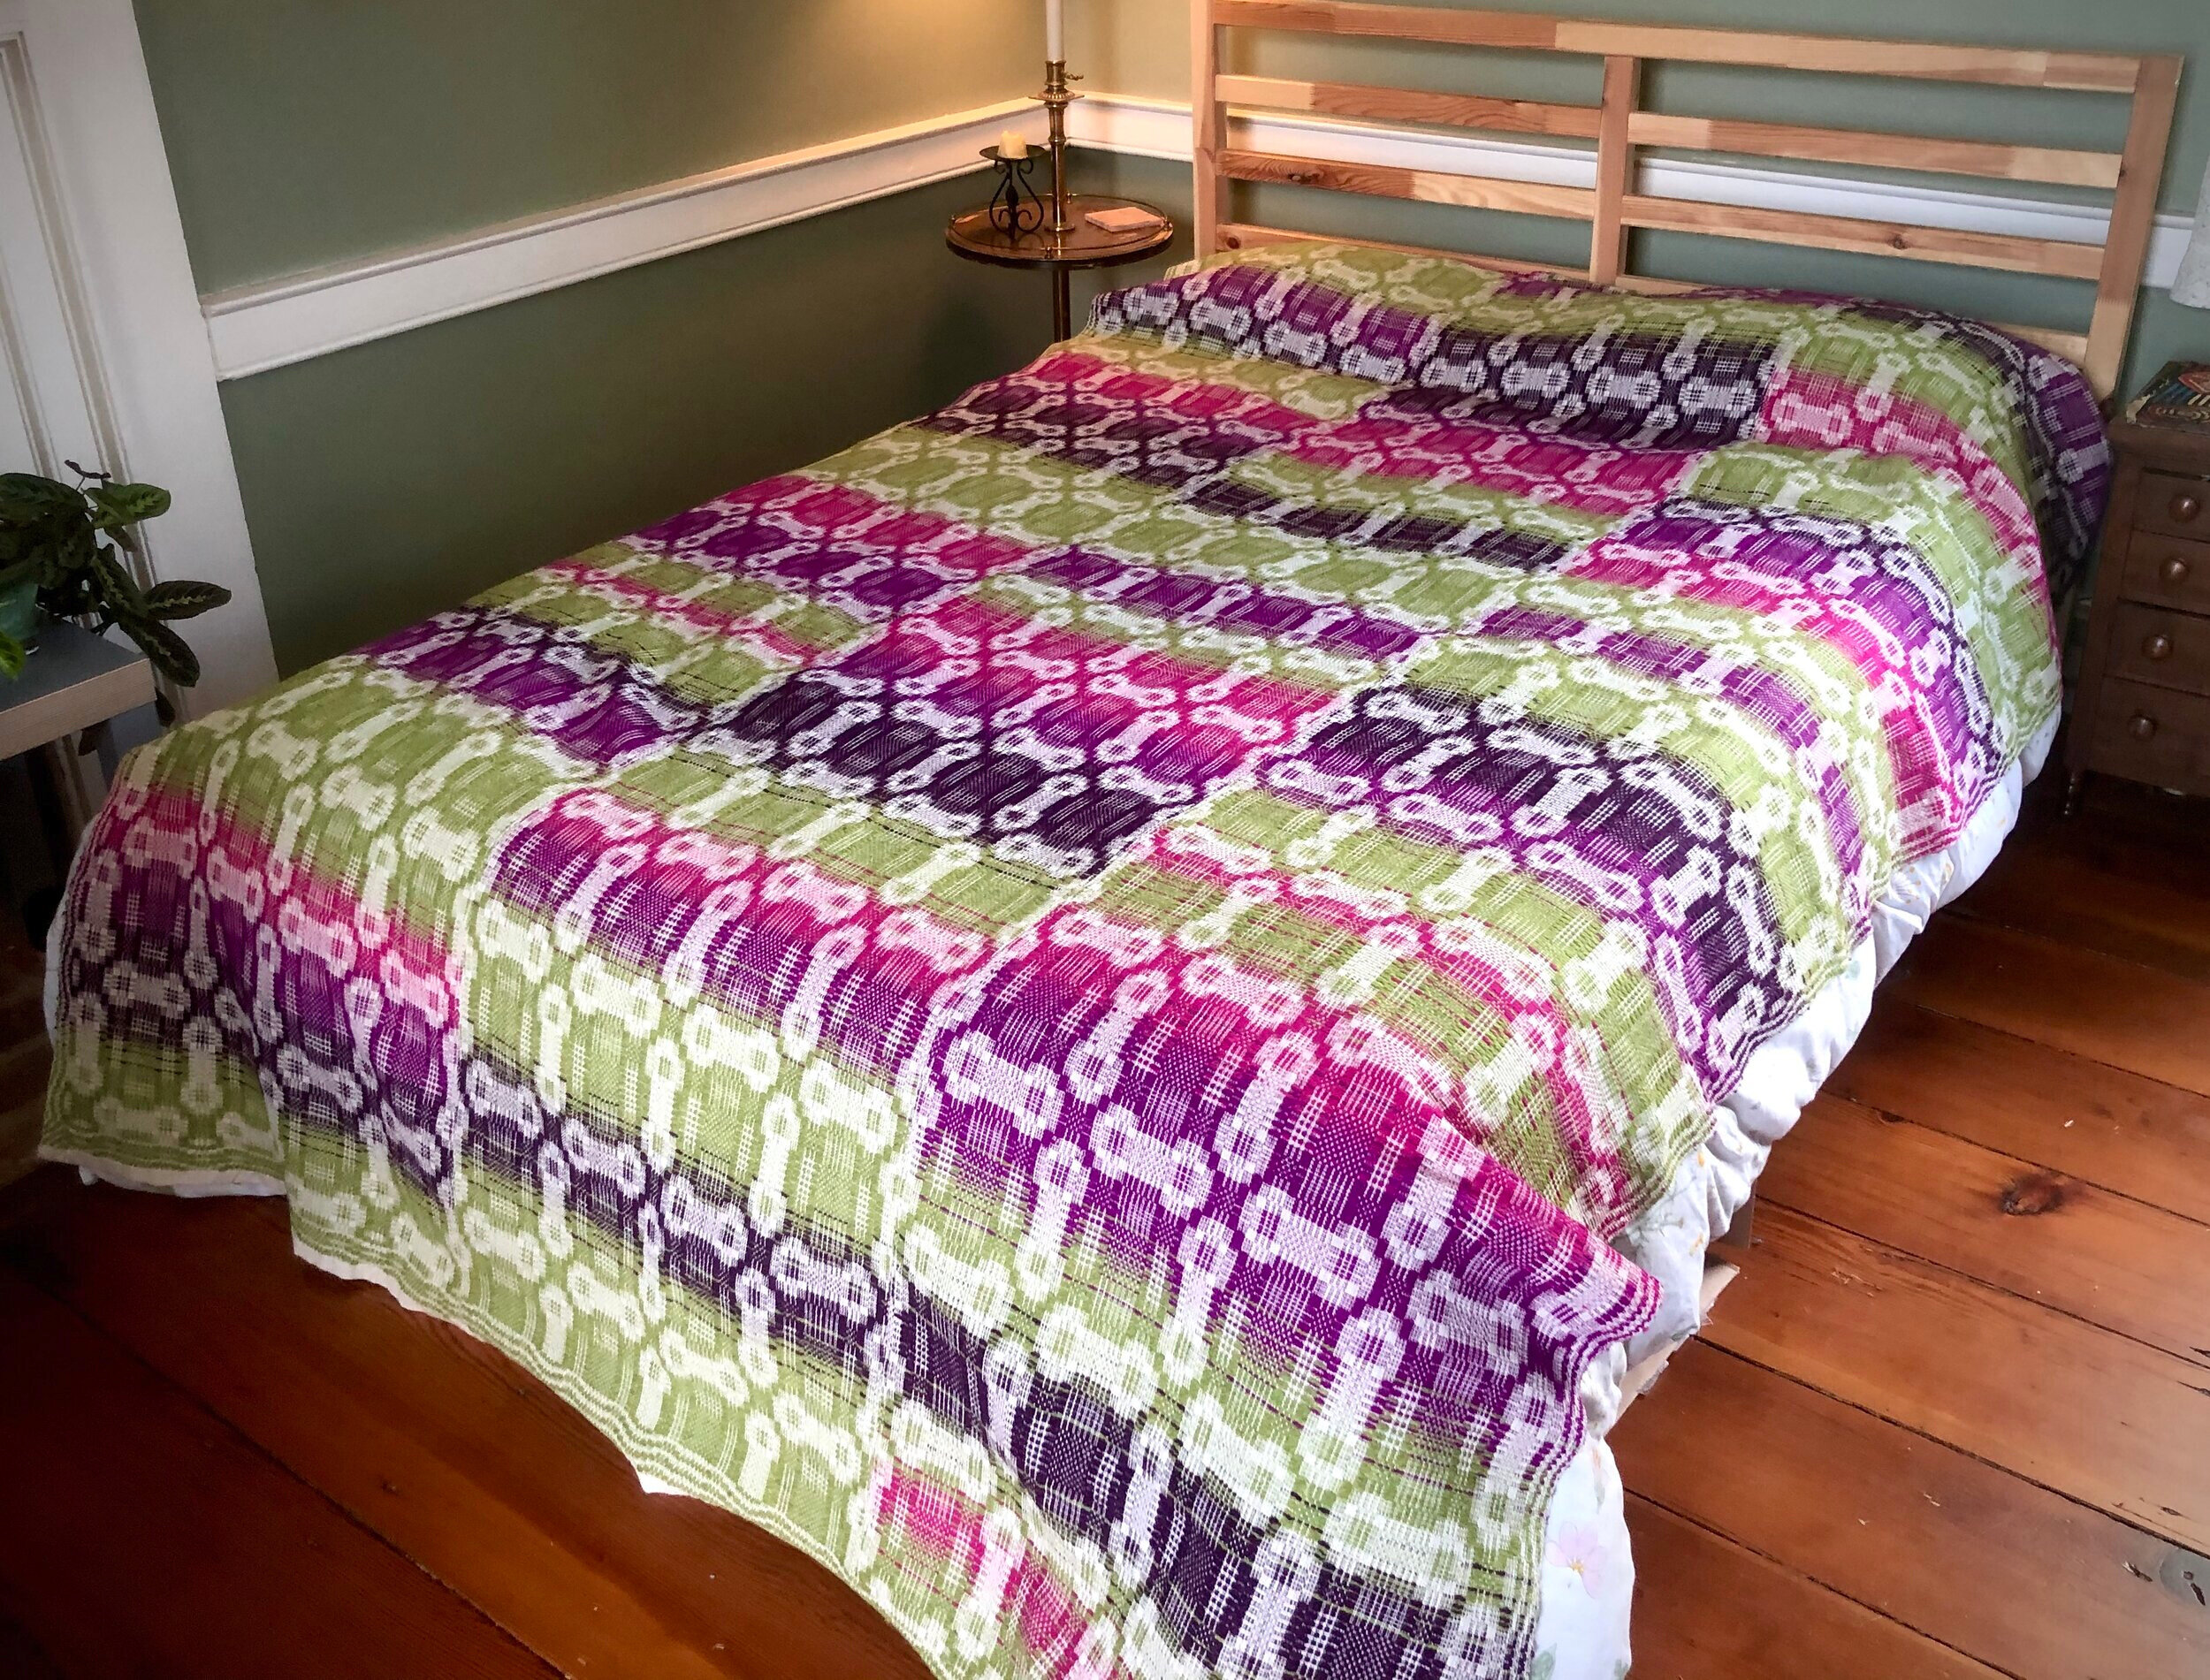   Rhododendron Coverlet , 2020. Wool and cotton. 65” x 90”. Woven in three panels using a Catalpa Flower draft. 